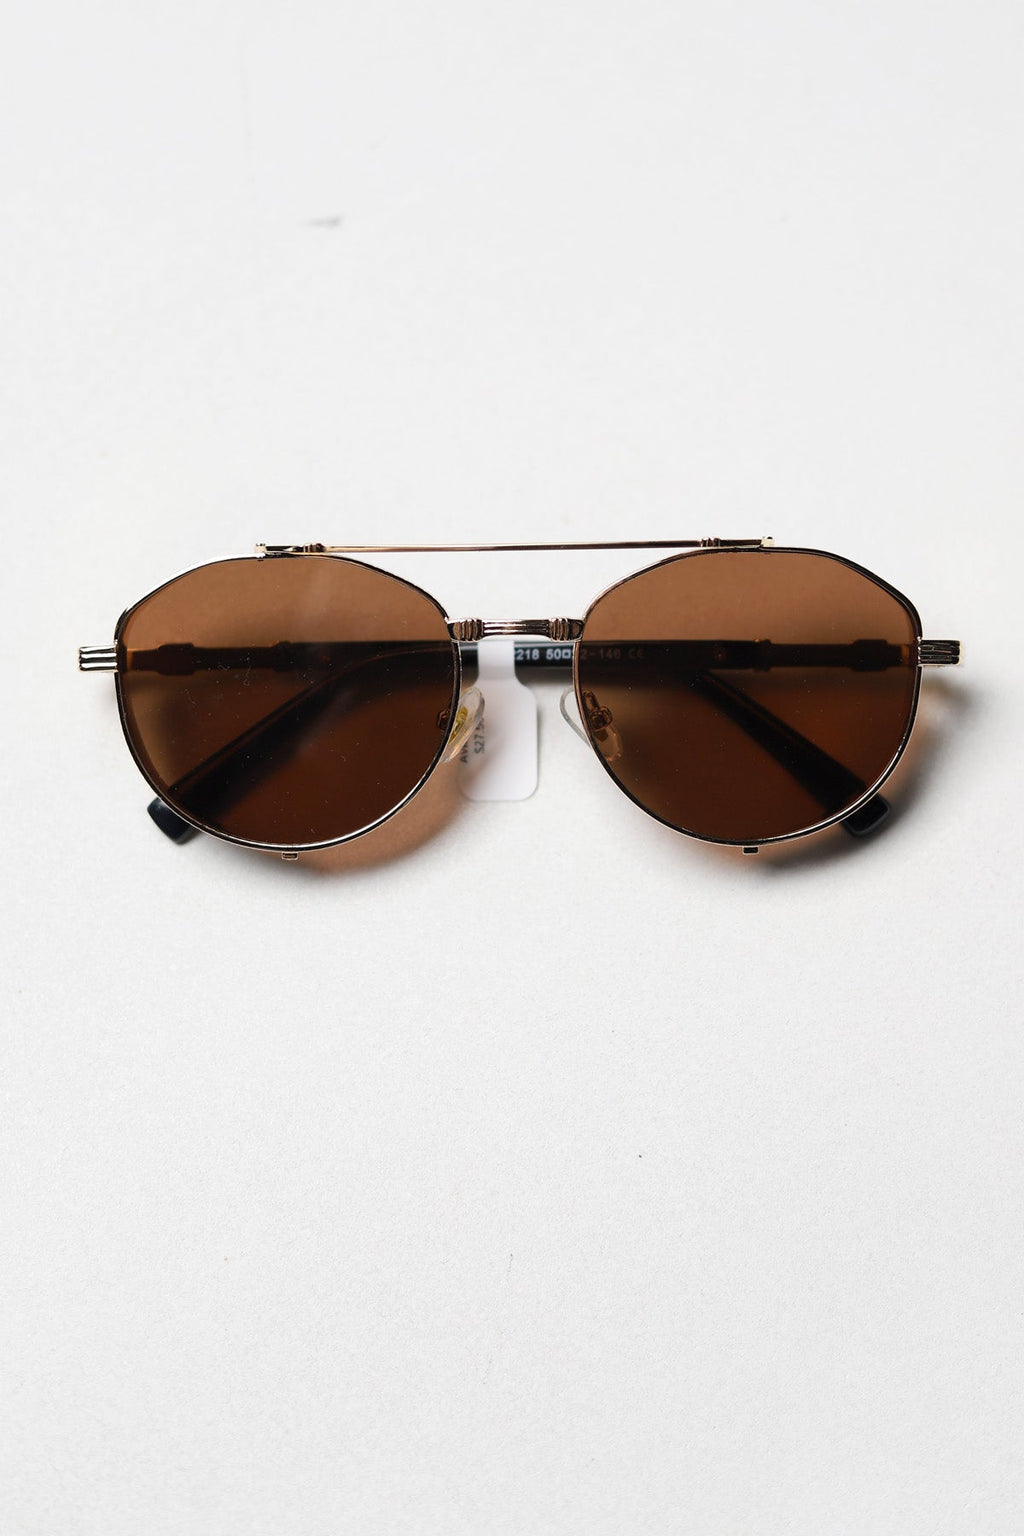 Blue Hammer II Retro Pilot Sunglasses With Metal Frame And UV400 Protection  In Hindi Simple And Elegant Design, Top Quality From Guhsz, $61.02 |  DHgate.Com